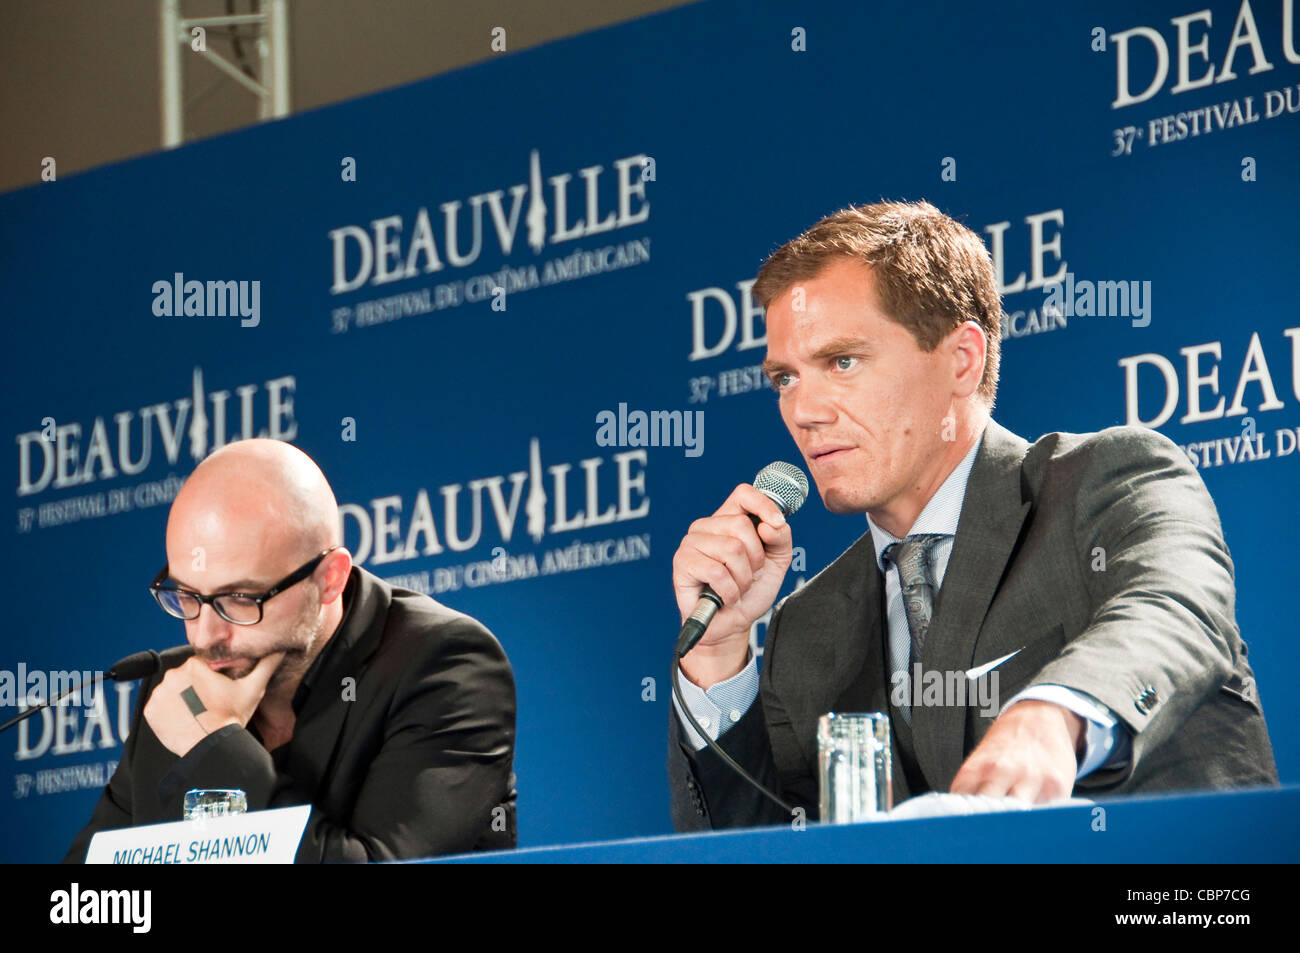 Michael Shannon at Deauville american film festival 2011 for the movie Take Shelter - France Stock Photo